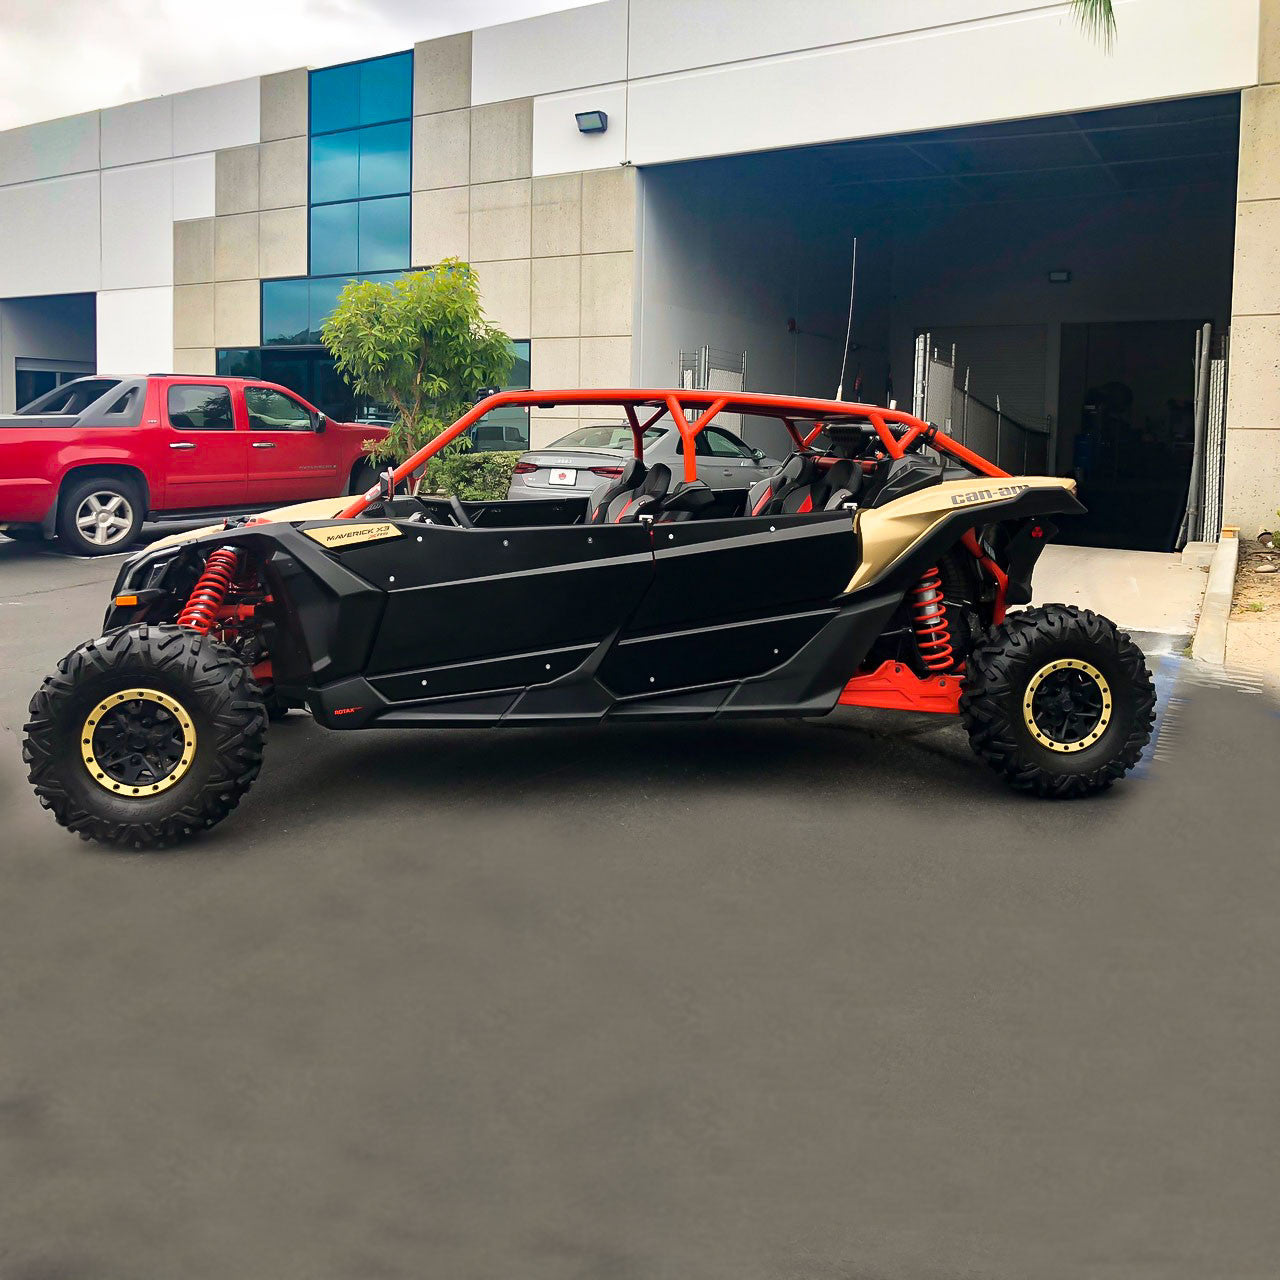 SDR X3 Max Sport-Shorty Cage | Can-Am Maverick X3 Max